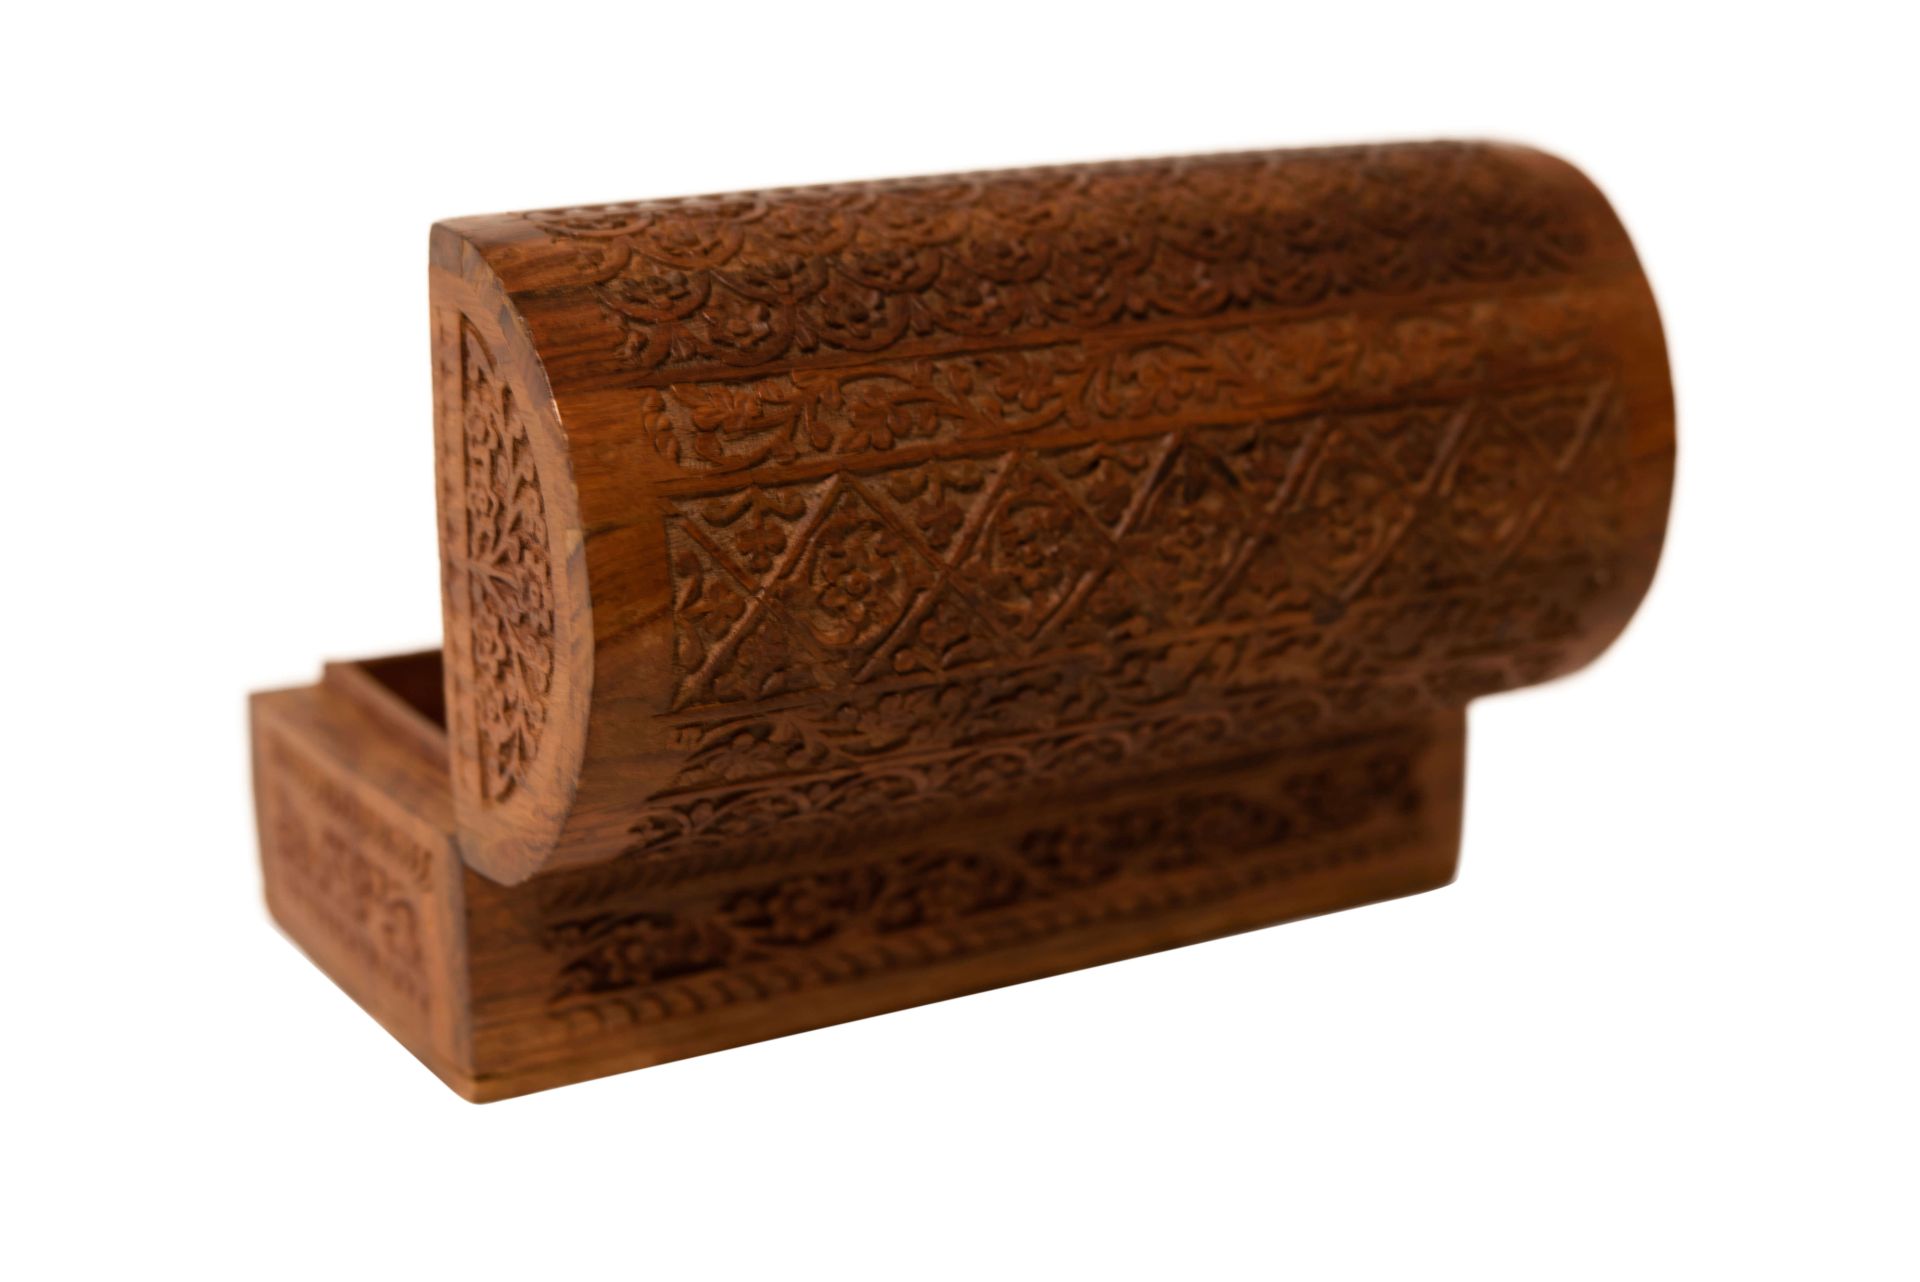 Holzkiste aus Rosenholz Asiatische Schnitzmotive | Rosewood Box with Carved Asian Motifs - Image 4 of 5